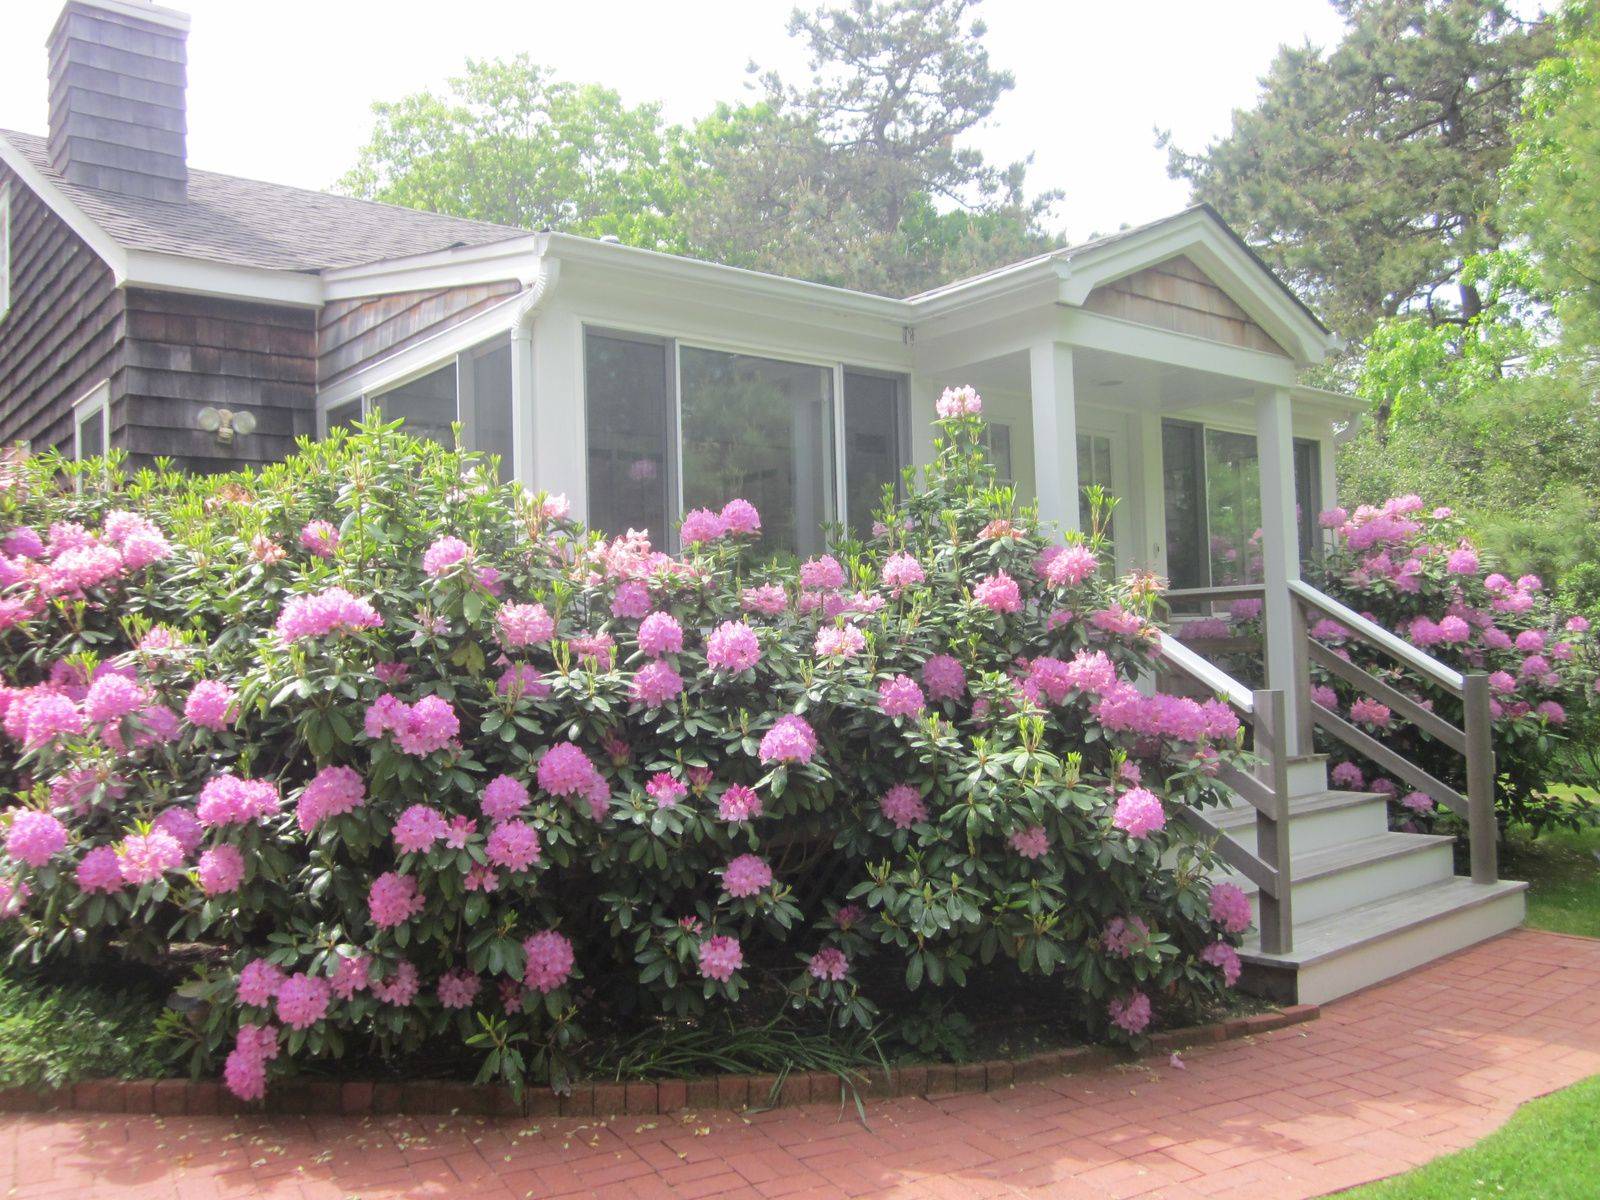 2 Bedroom Wainscott Cottage - First two weeks August 15k 2023